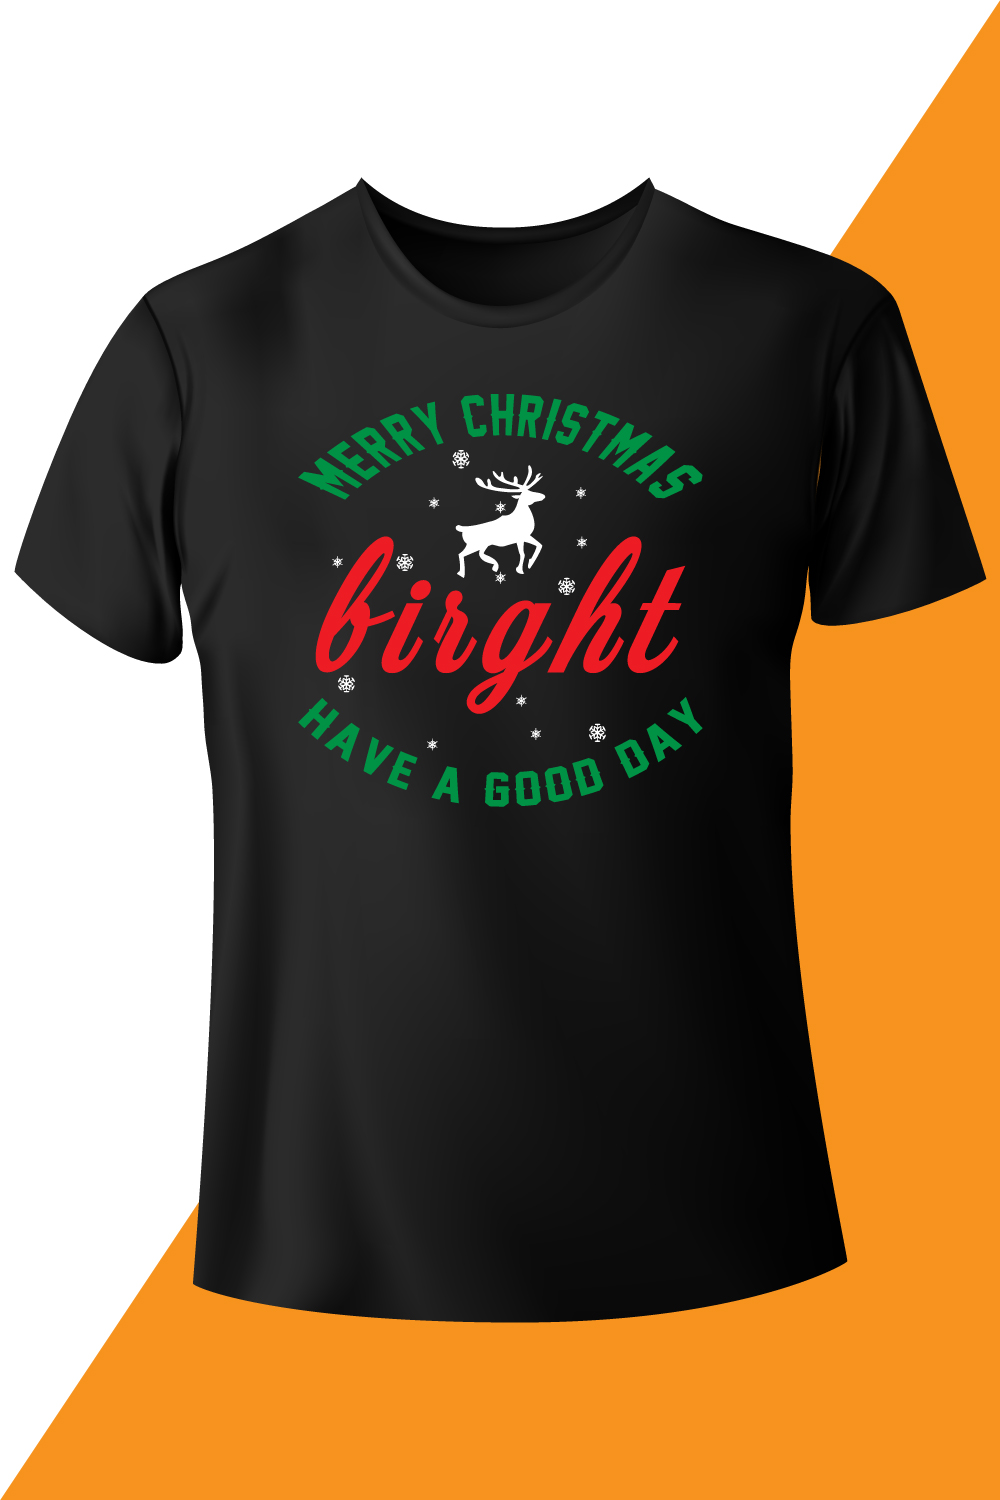 Image of a black t-shirt with a sophisticated print on the theme of Christmas.